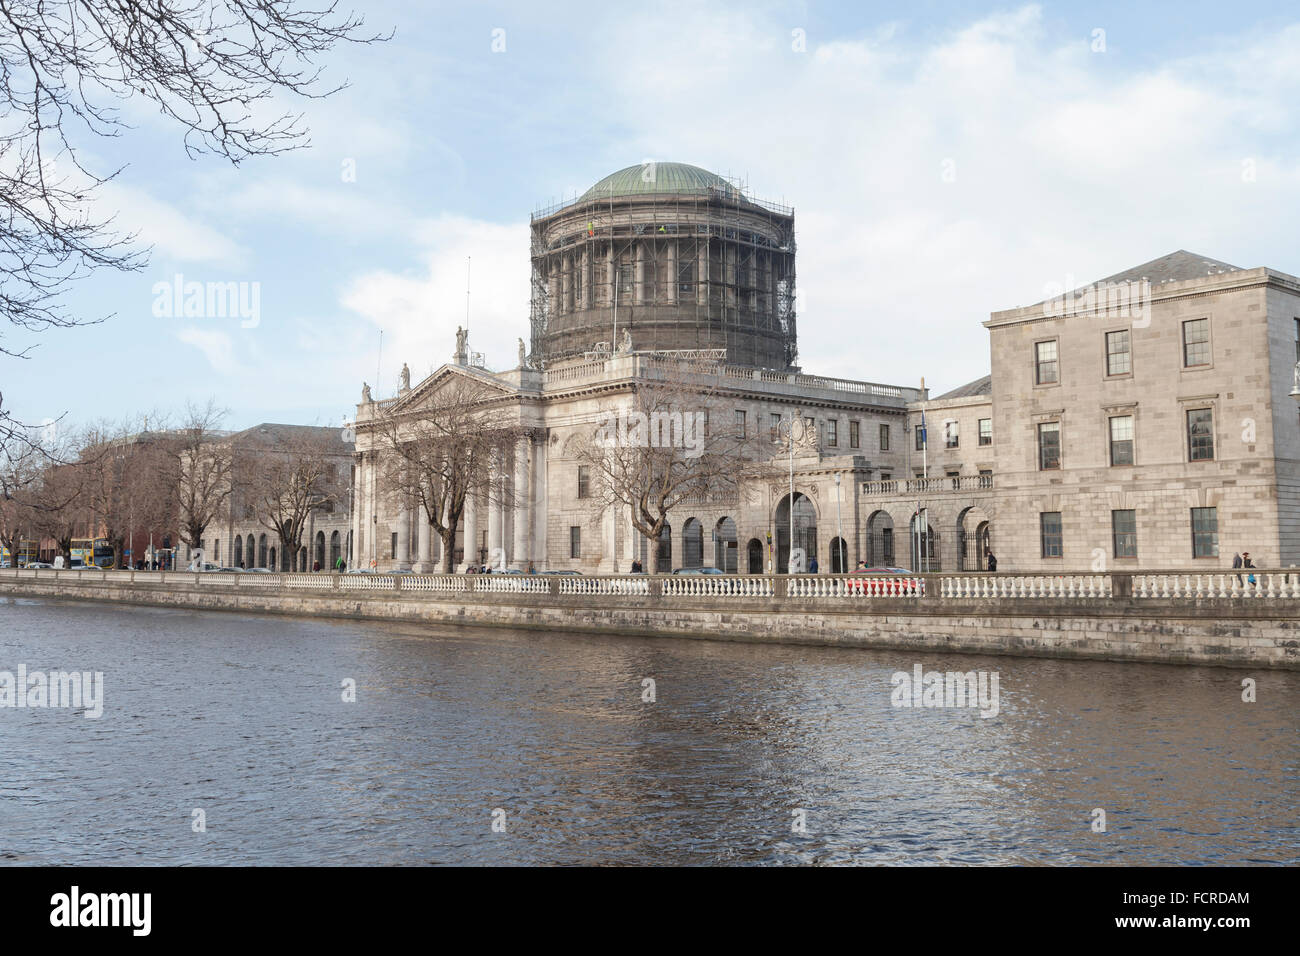 The Four Courts building in Dublin Stock Photo